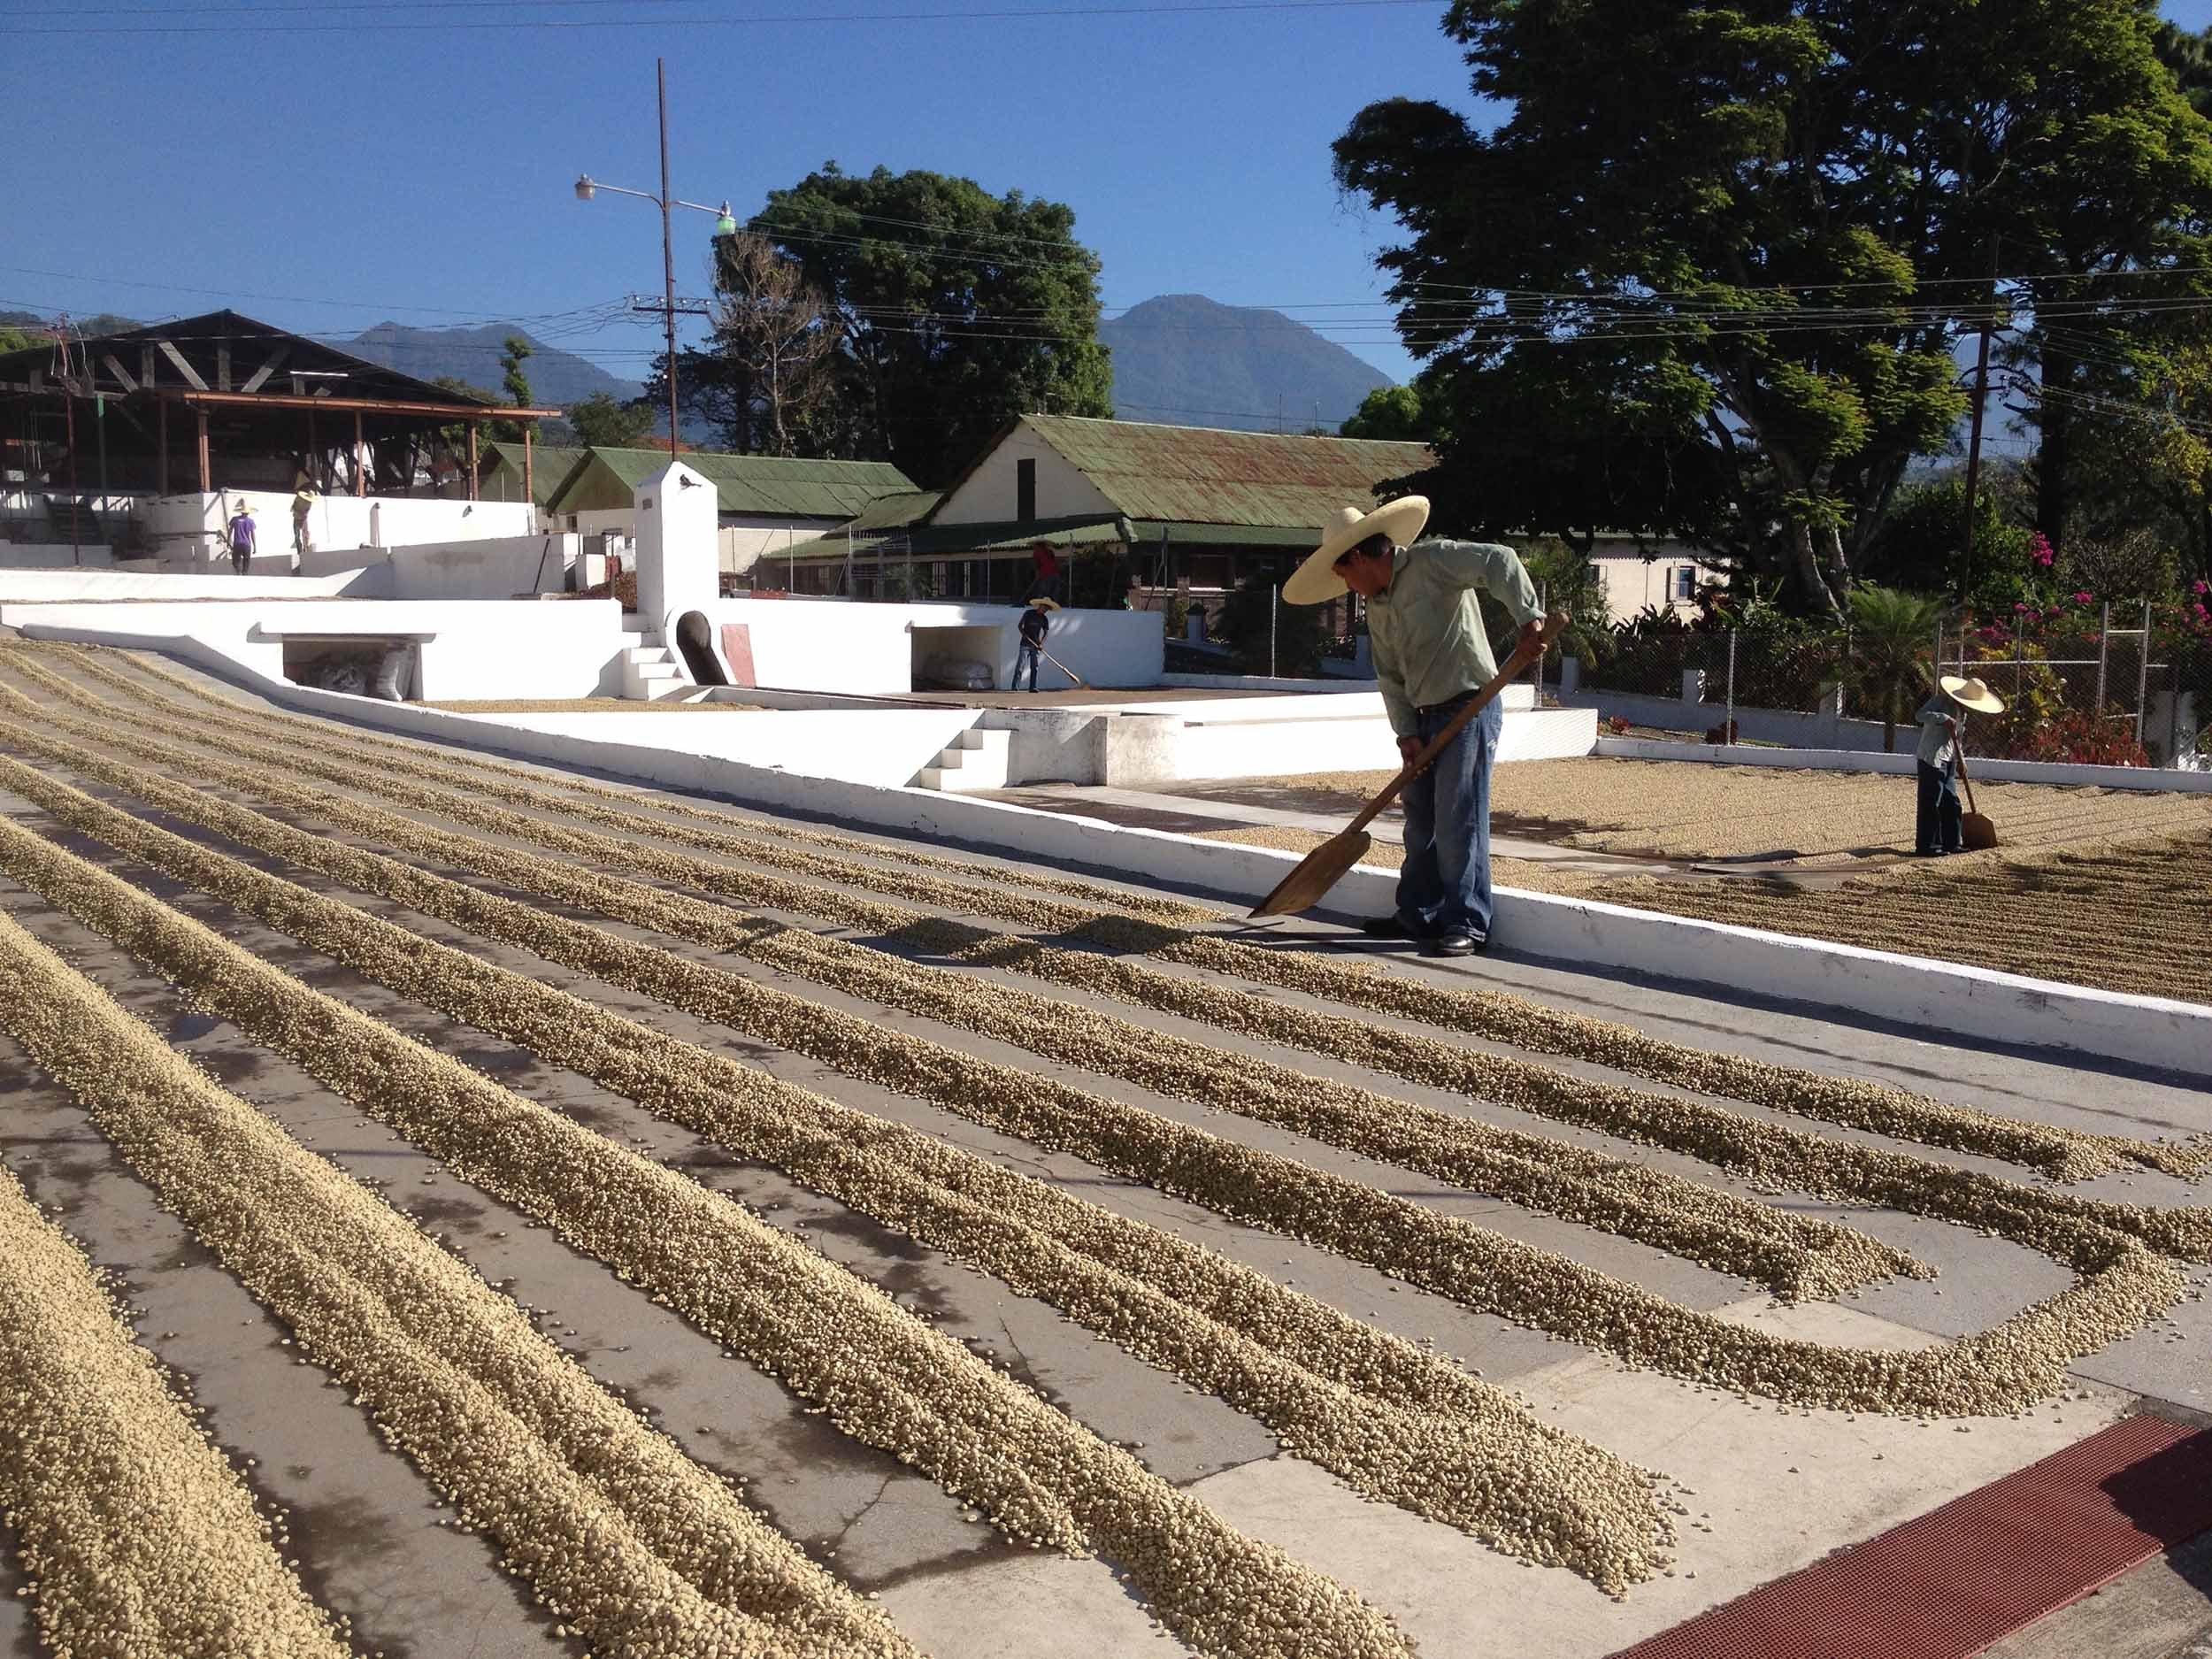  Workers at Finca San Jeronimo Miramar in Atitlan, Guatemala, rake coffee beans arranged in long rows on a patio to dry. Raw coffee beans take between 4 and 7 days to dry fully in the open air.  